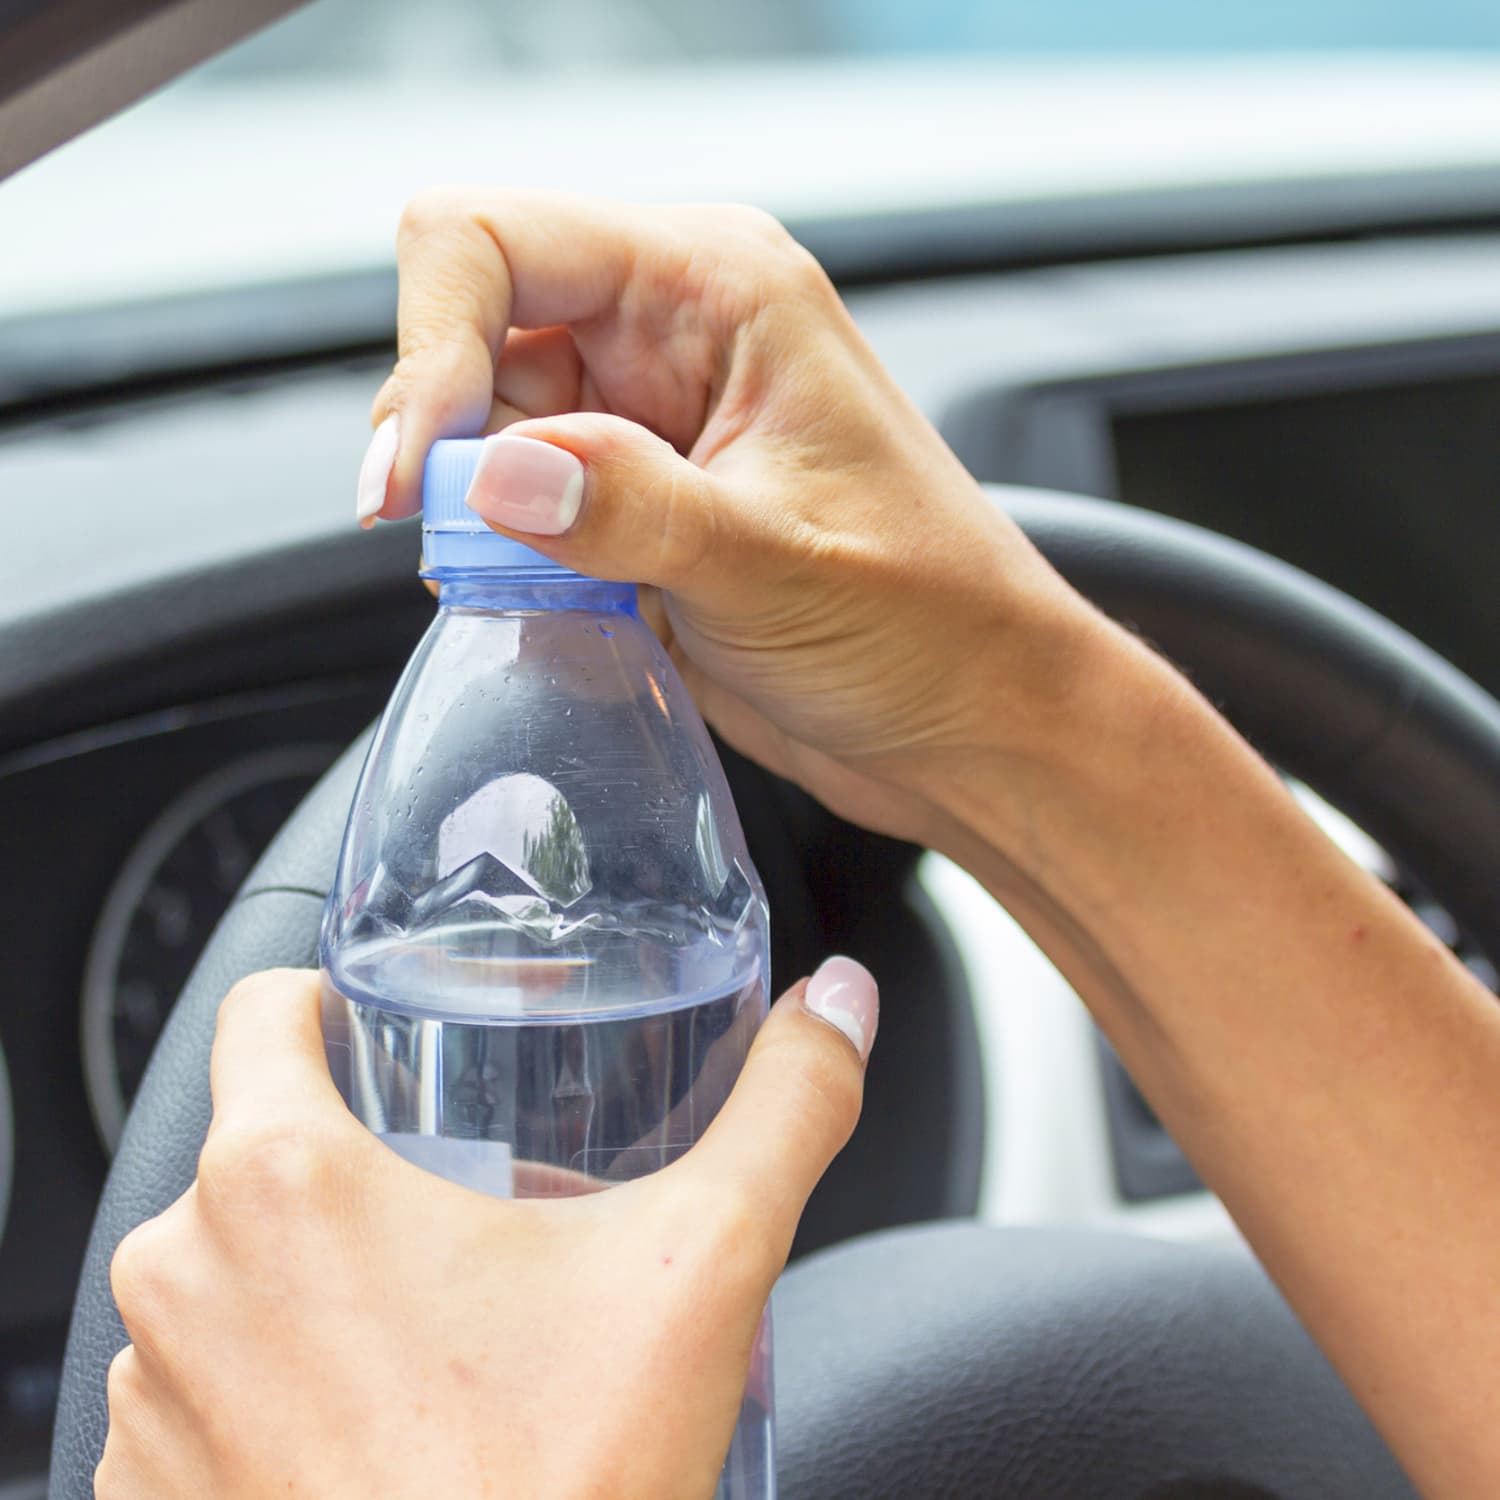 Firefighters warn leaving bottled water in your car could start a fire